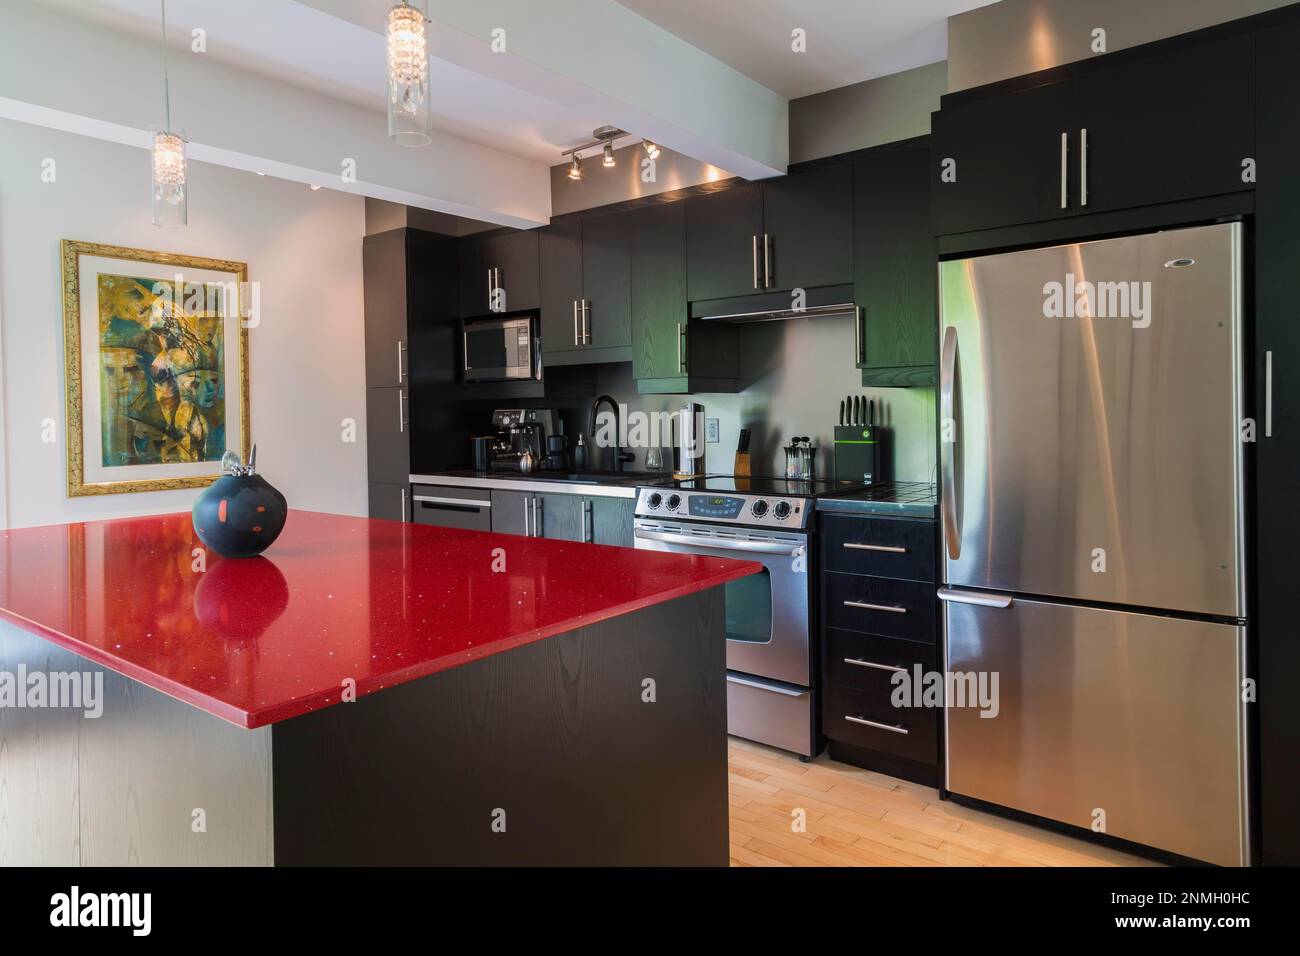 Black melamine cabinets and island with red quartz countertop in kitchen inside modern home Stock Photo